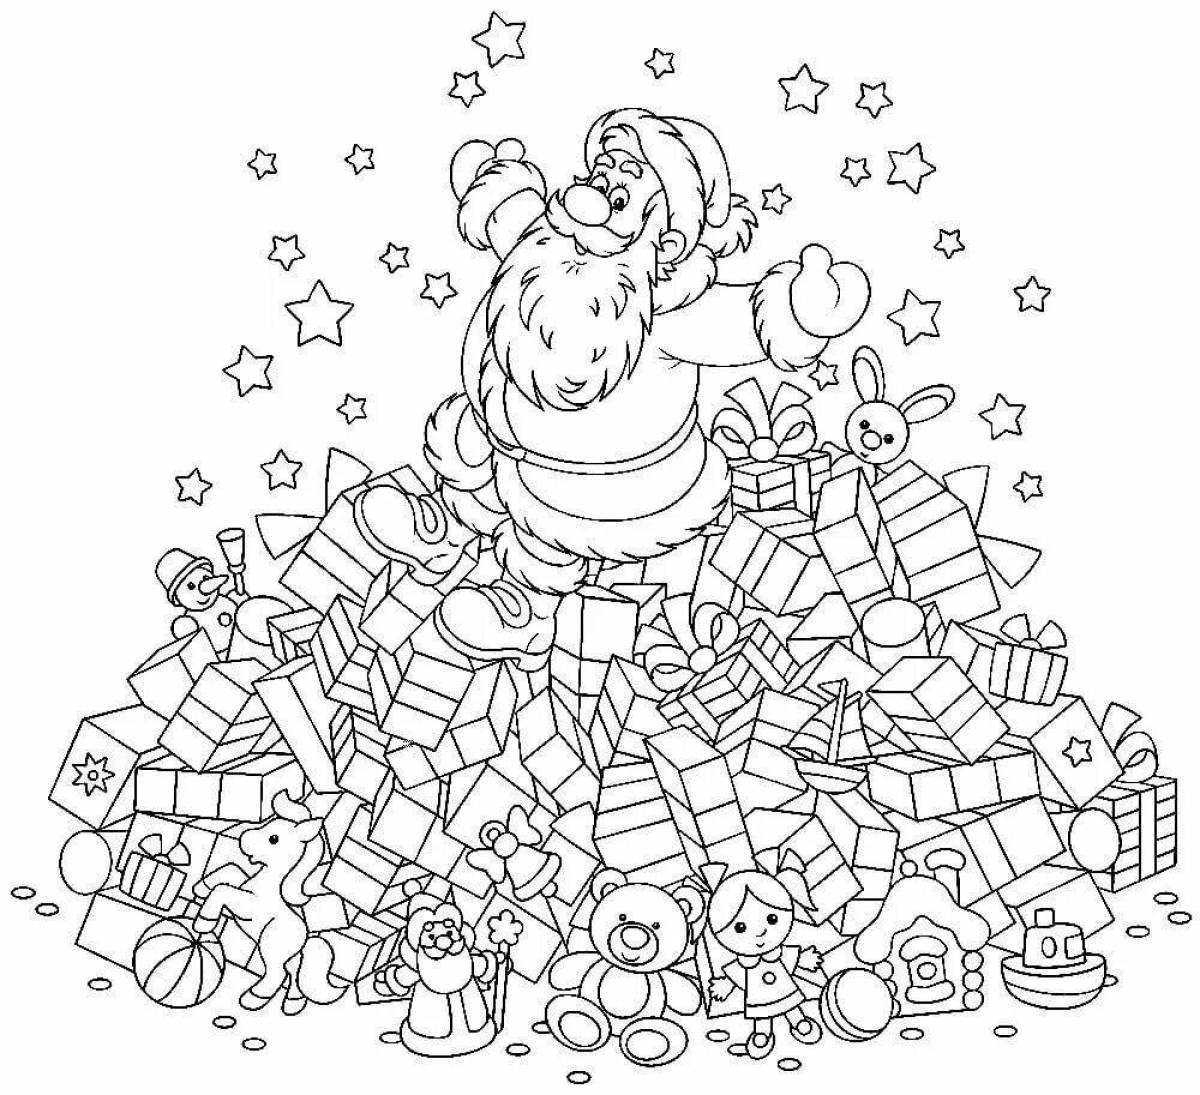 Exciting santa claus coloring by numbers